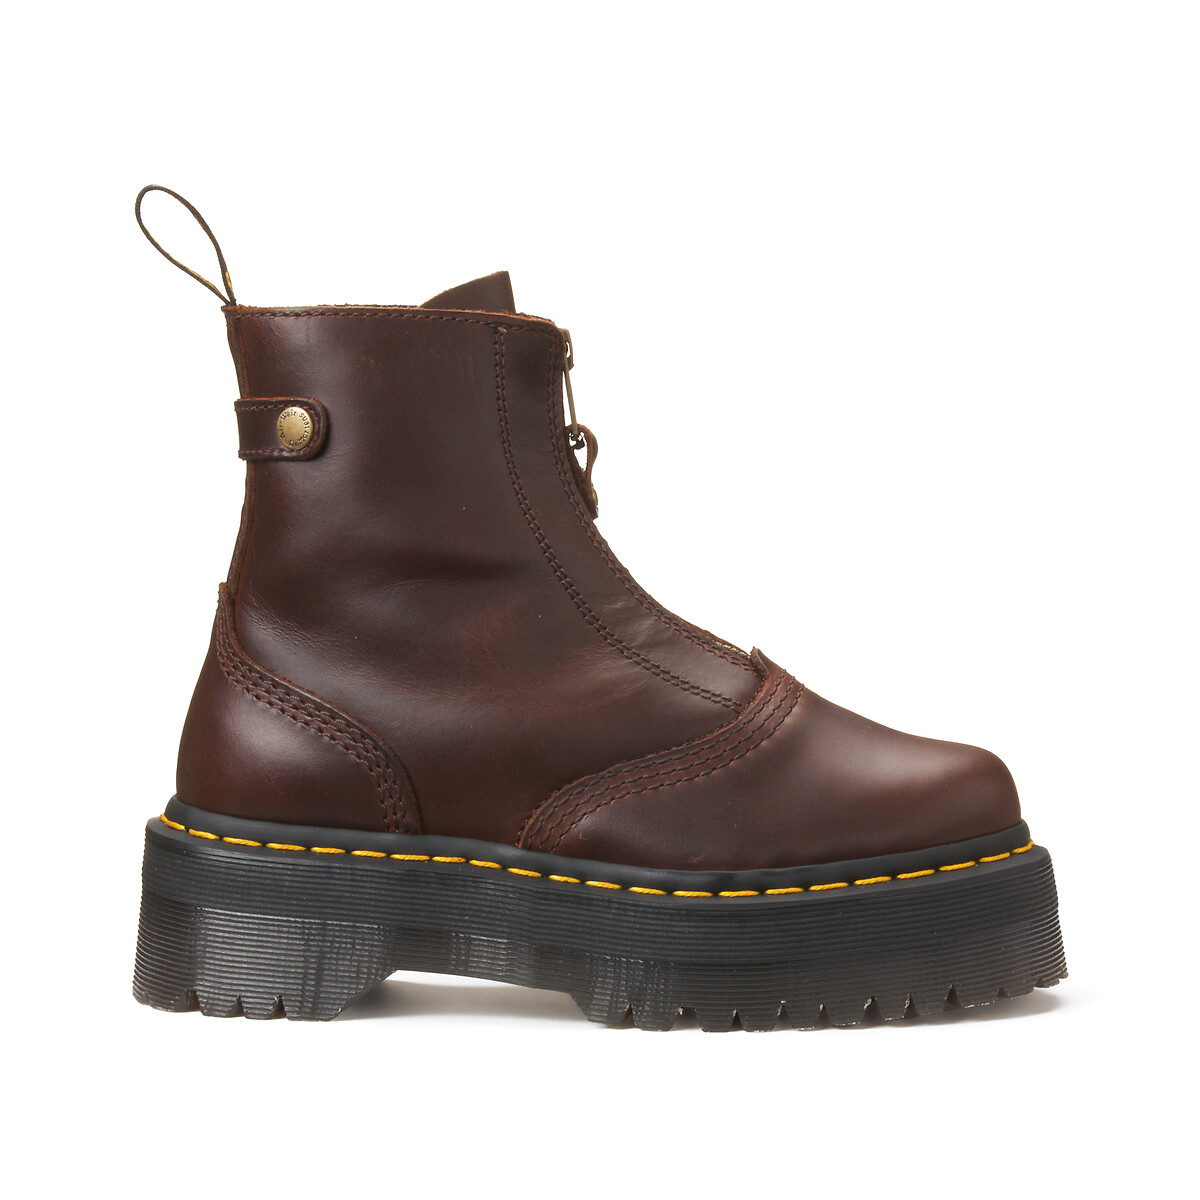 Jetta Sendal Ankle Boots in Leather with Zip Fastening